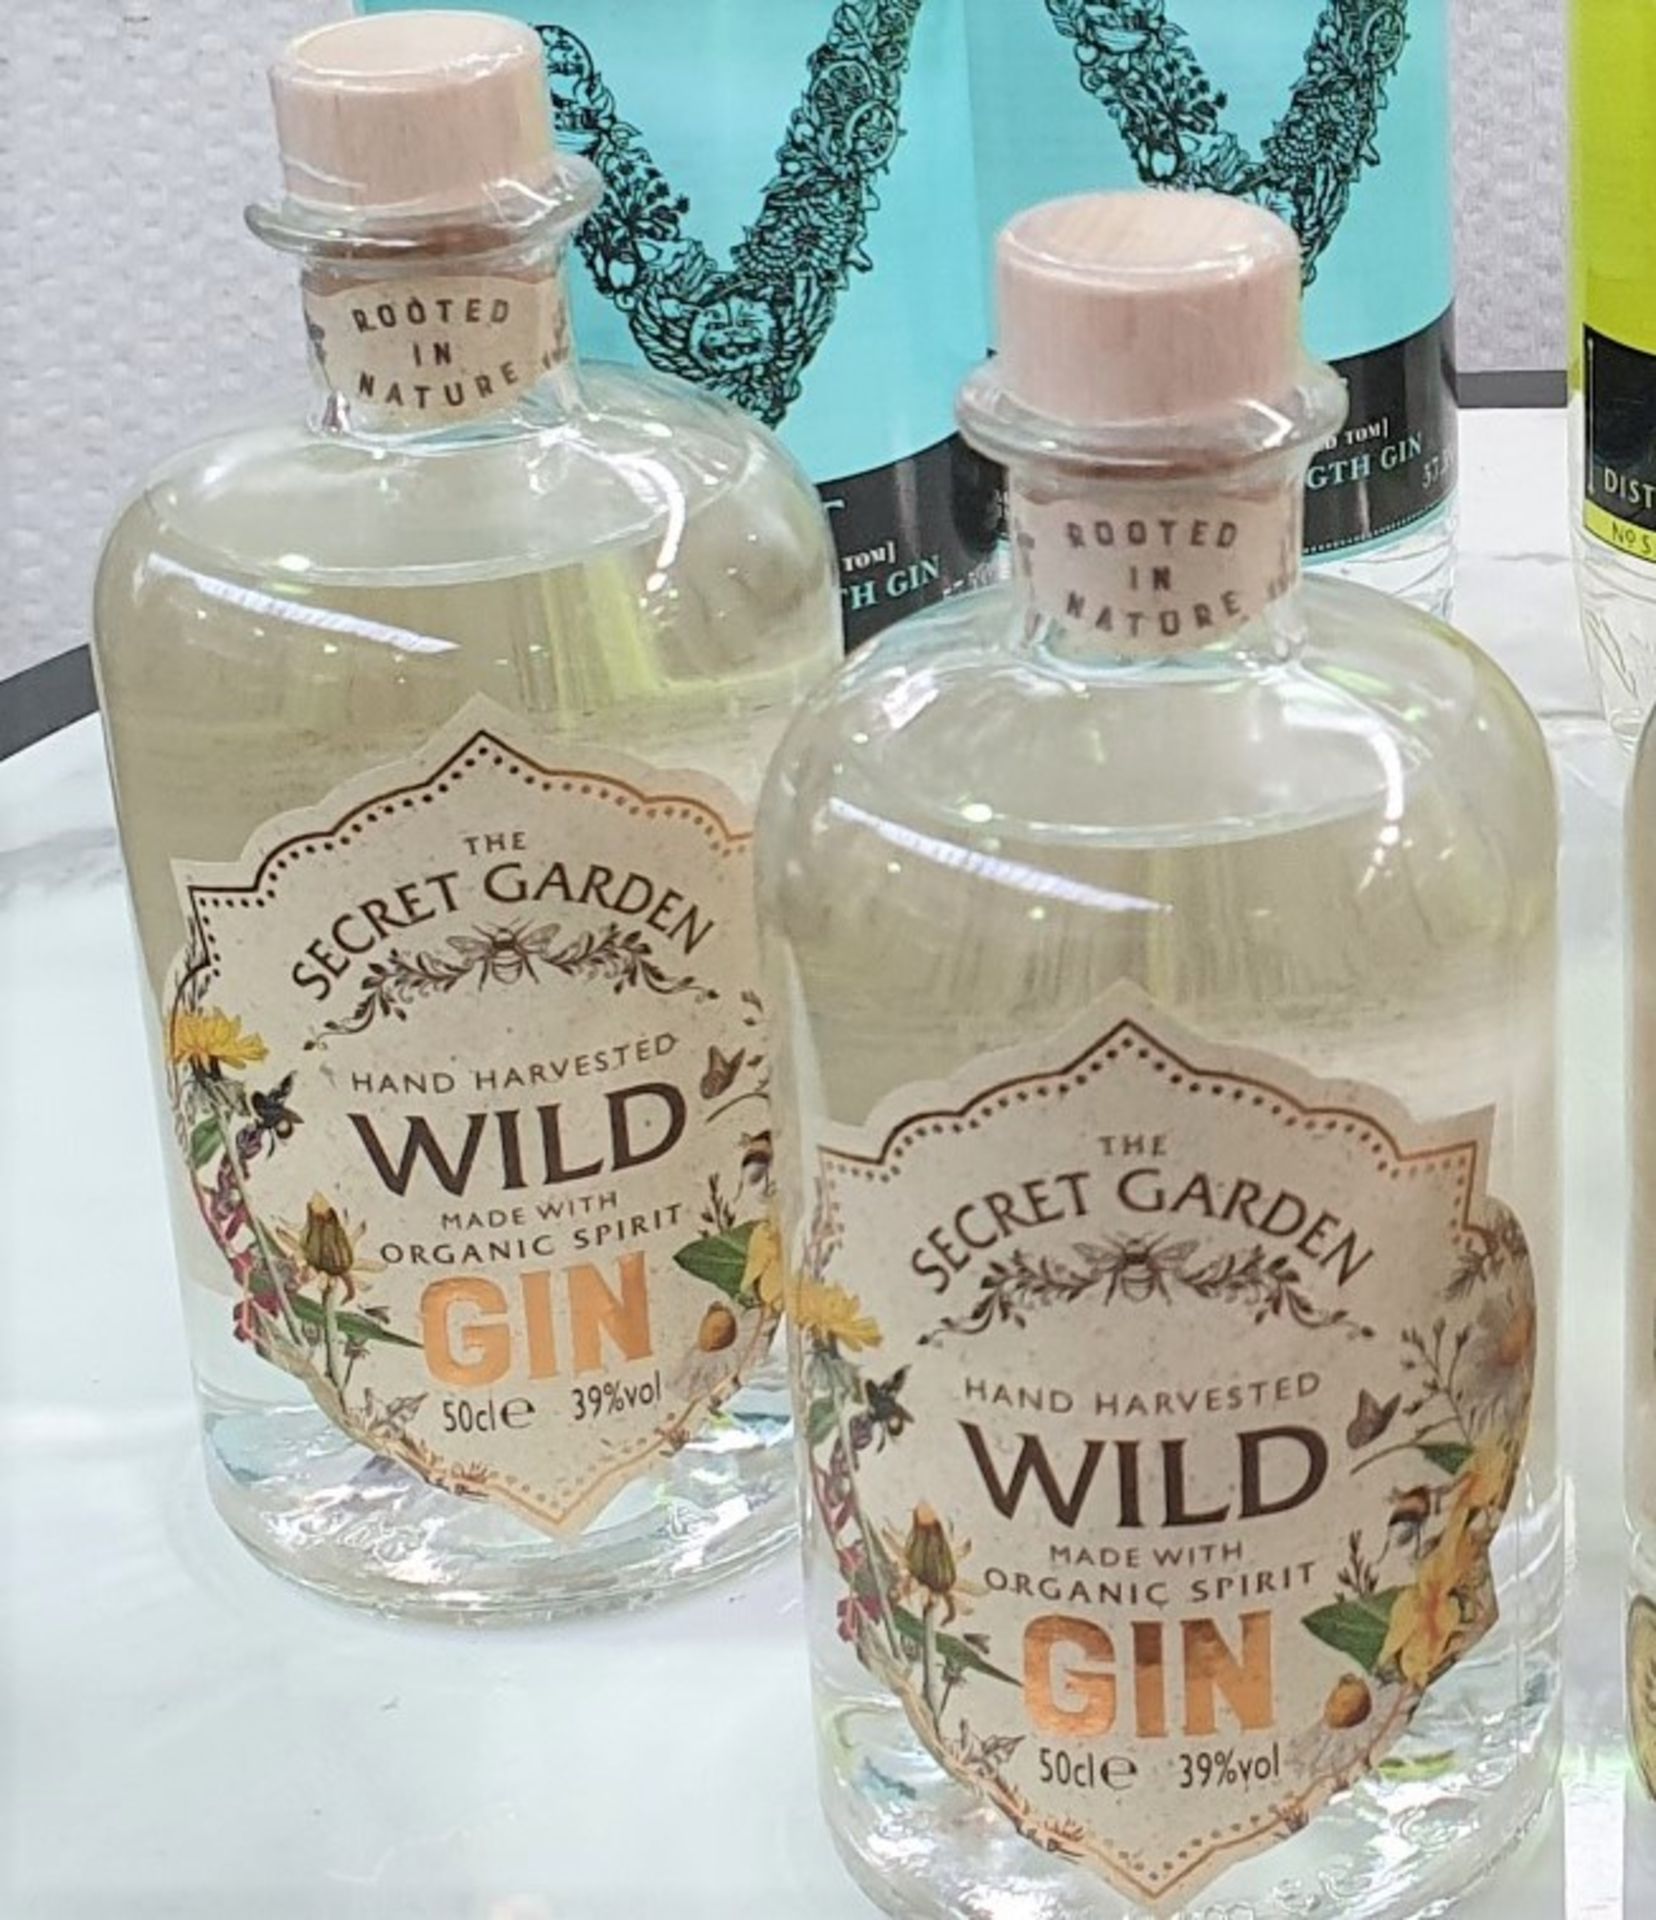 2 x Bottles of The Secret Garden Hand Harvested Wild Gin - 50cl 39% - New and Sealed - RRP £72 - - Image 2 of 2